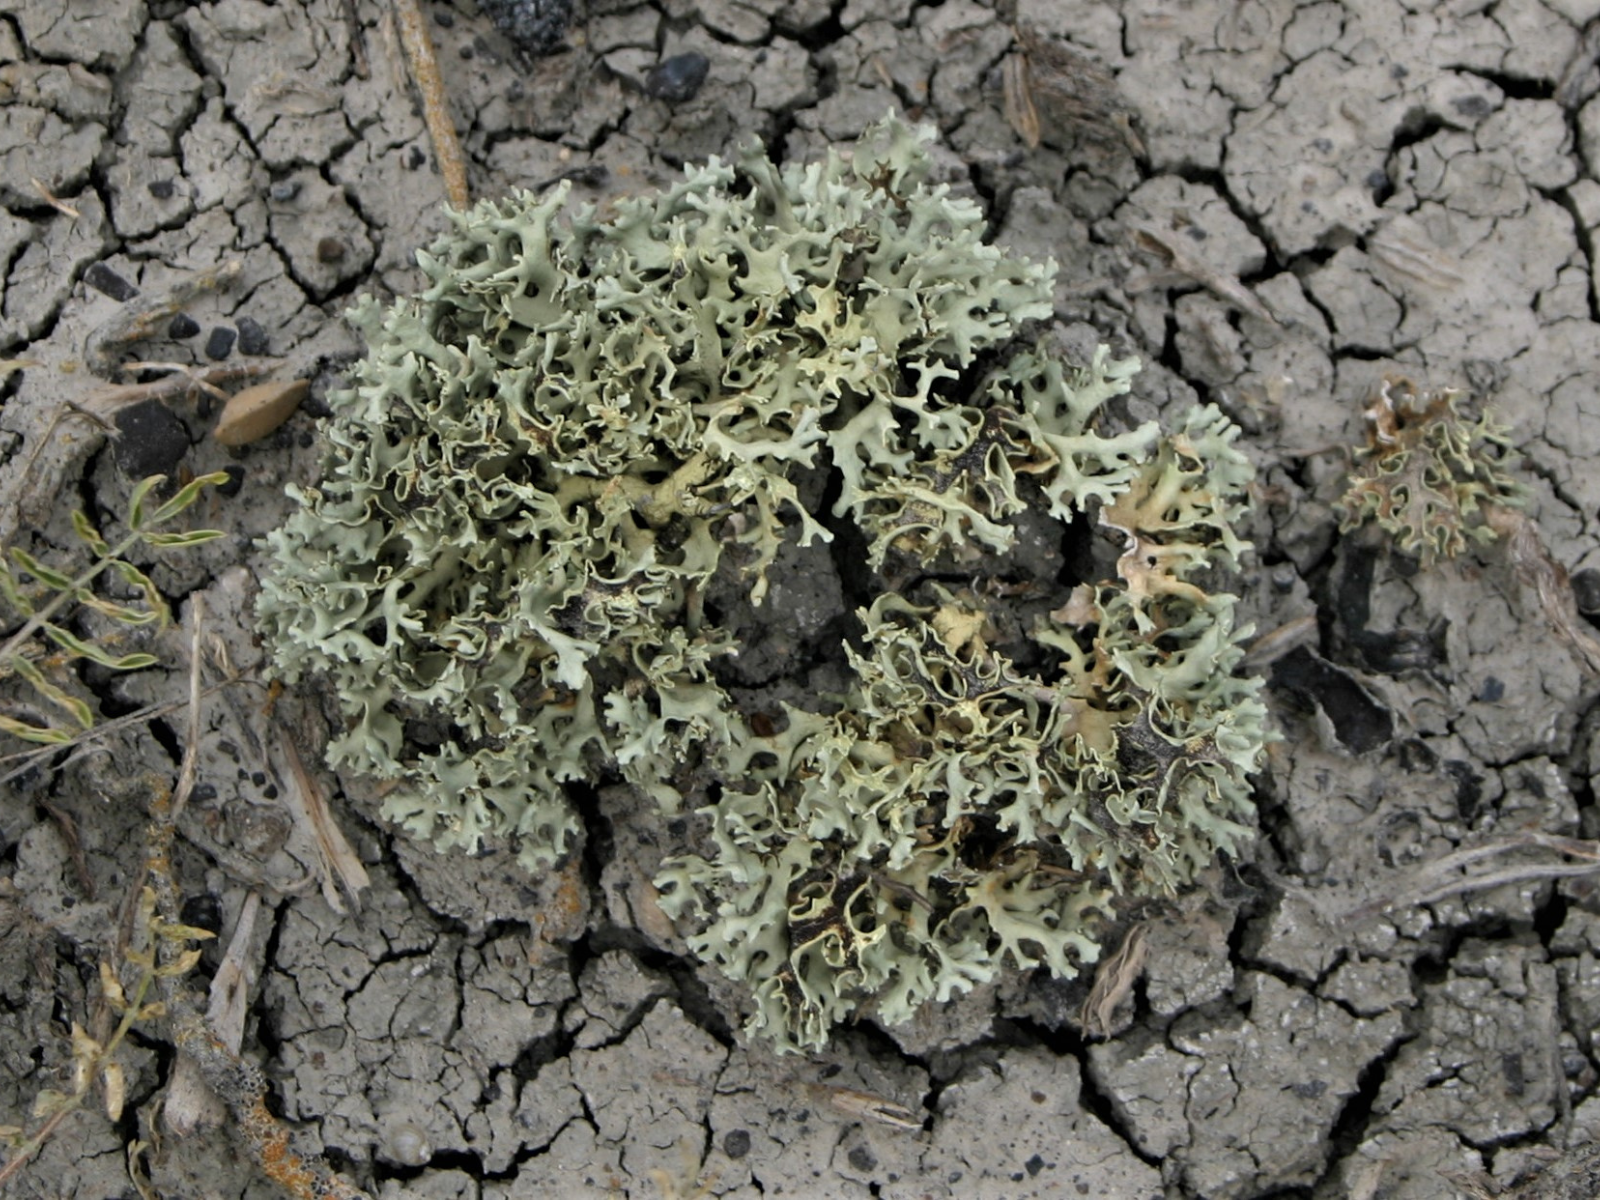 A coral-like green lichen growing from dry cracked soil.